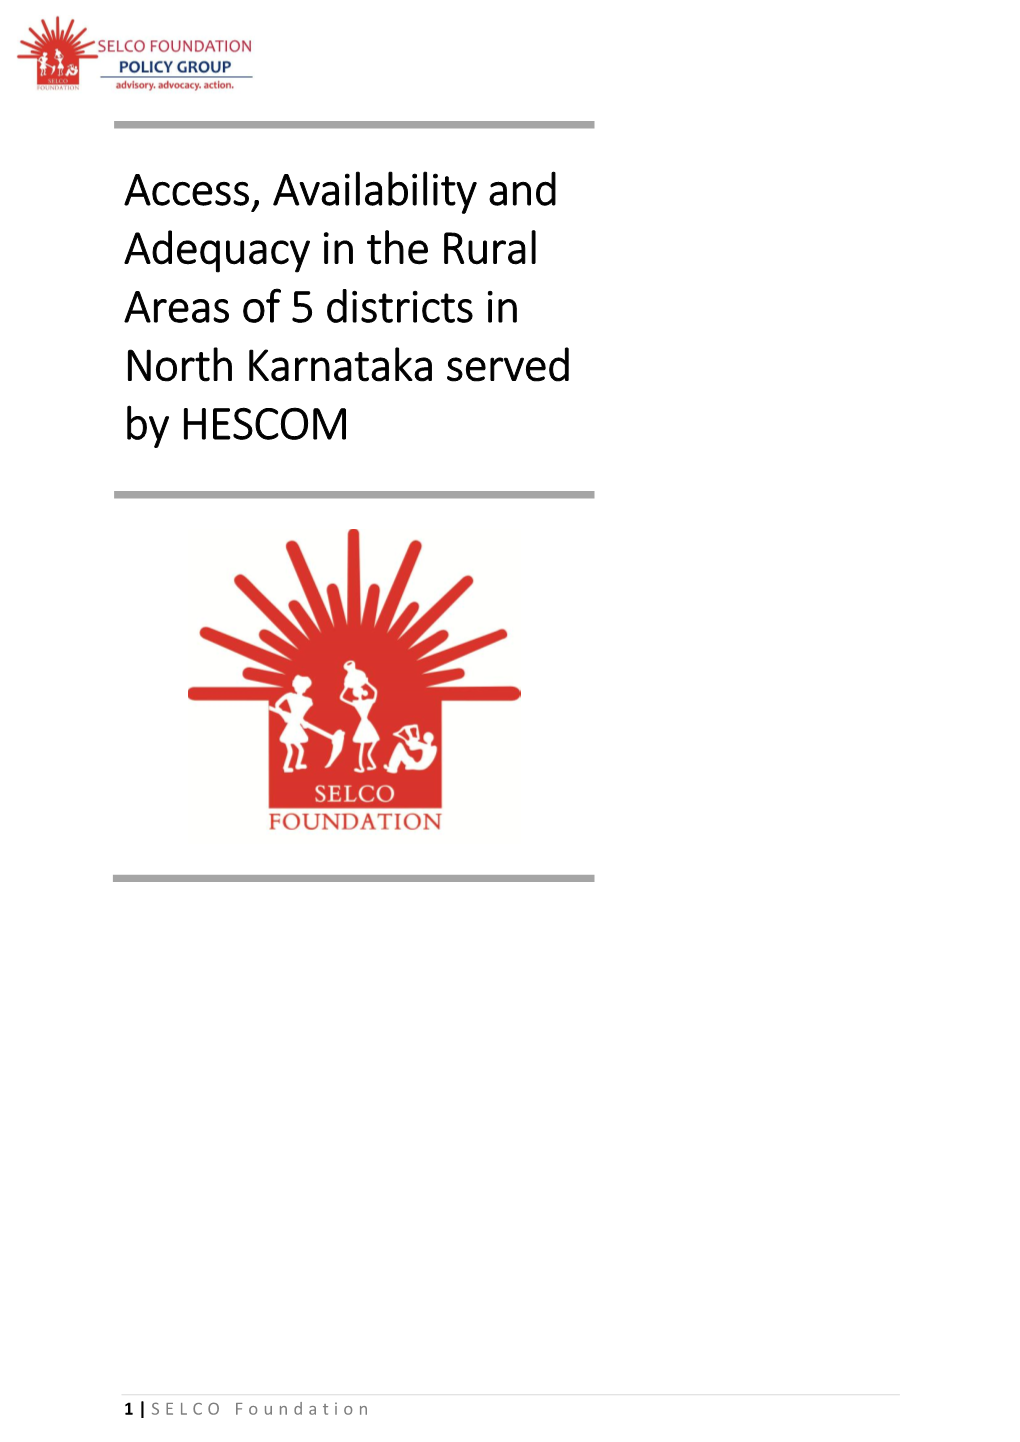 Access, Availability and Adequacy in the Rural Areas of 5 Districts in North Karnataka Served by HESCOM